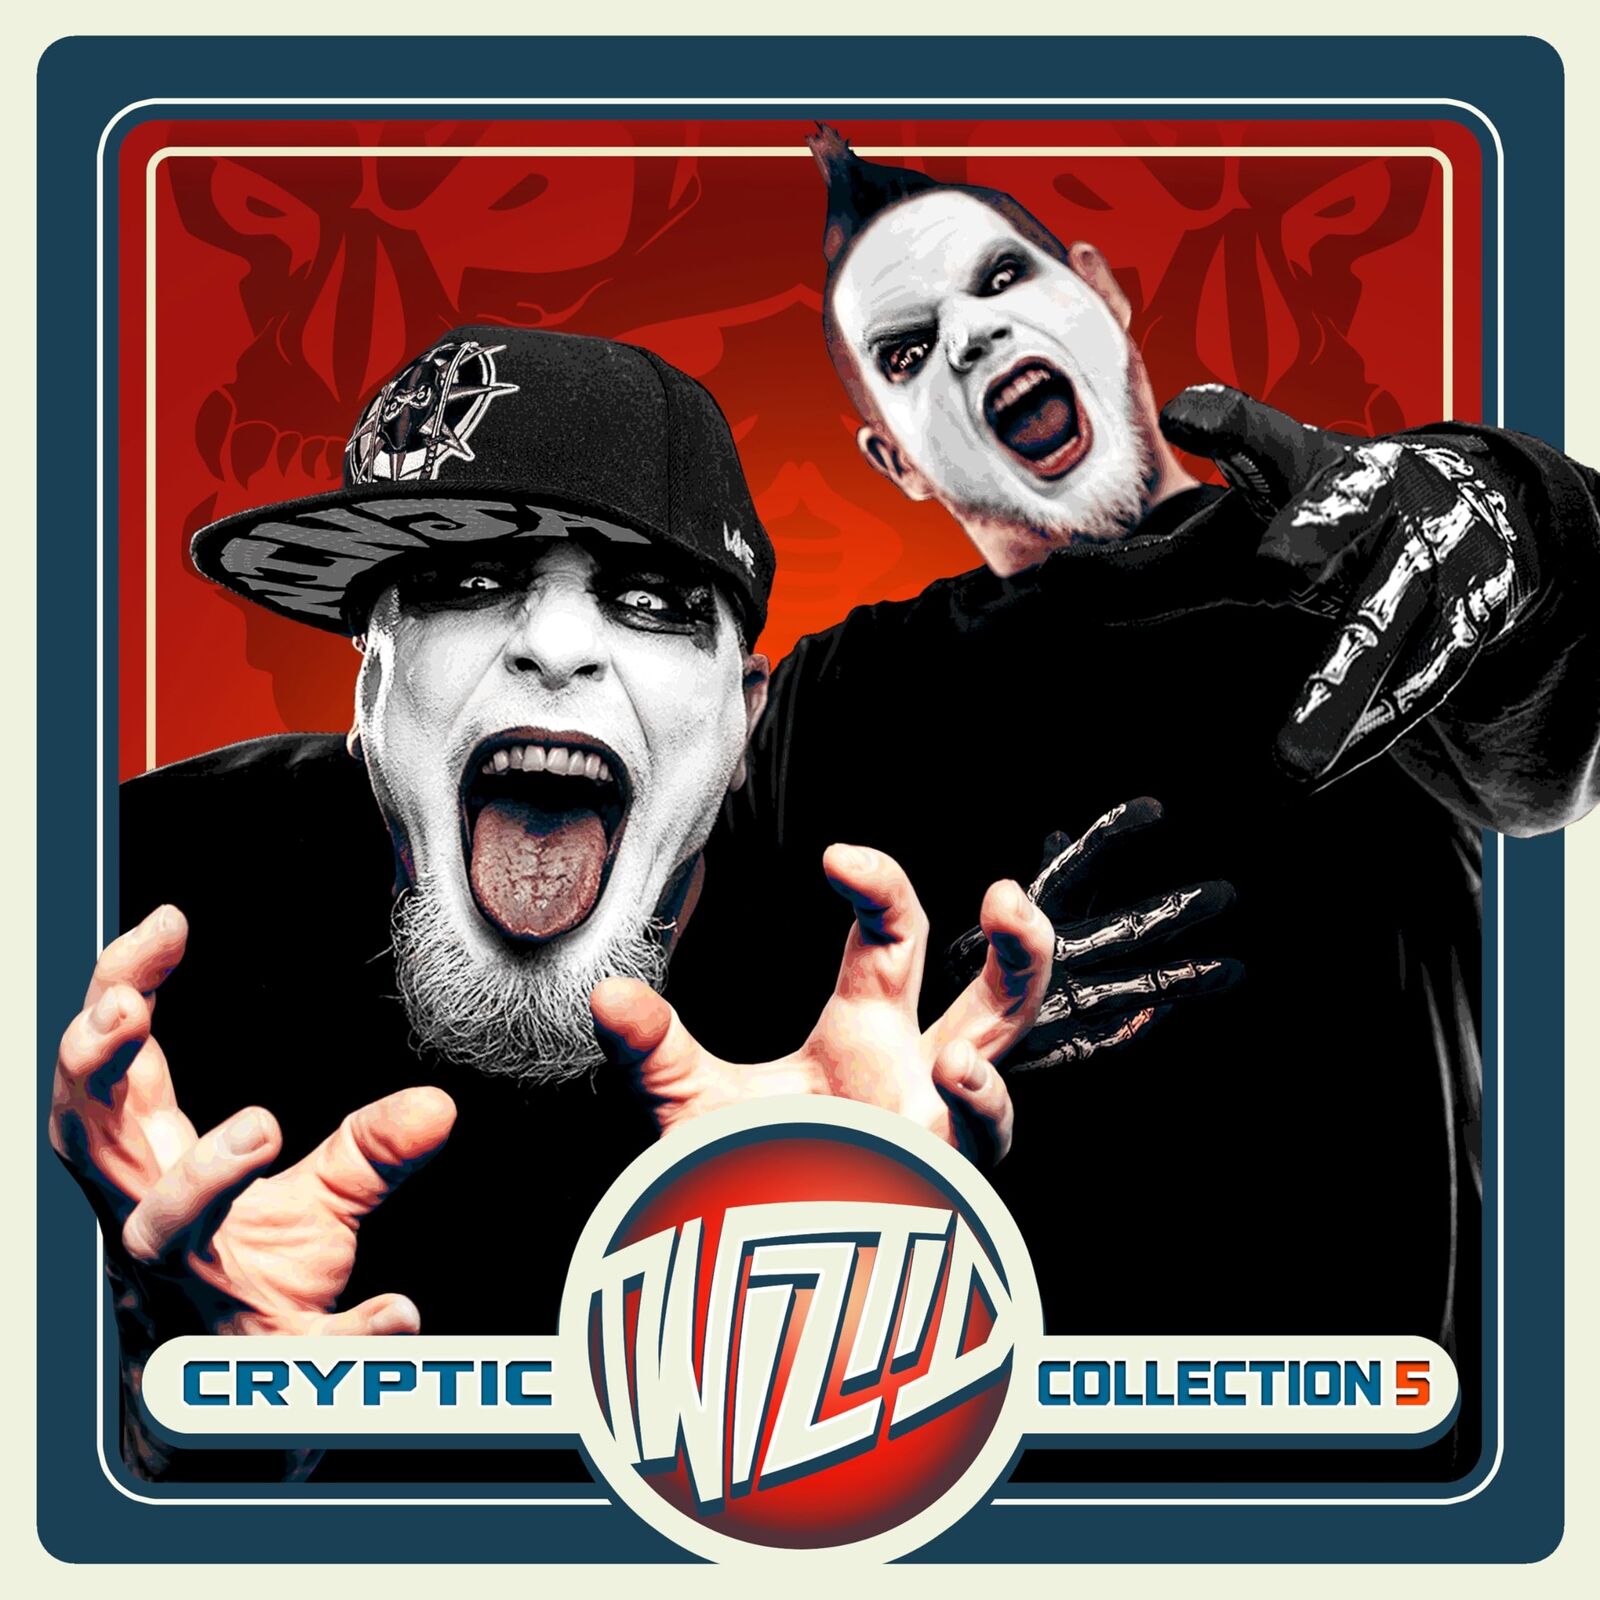 Twiztid Cryptic Collection 5 (Vinyl)